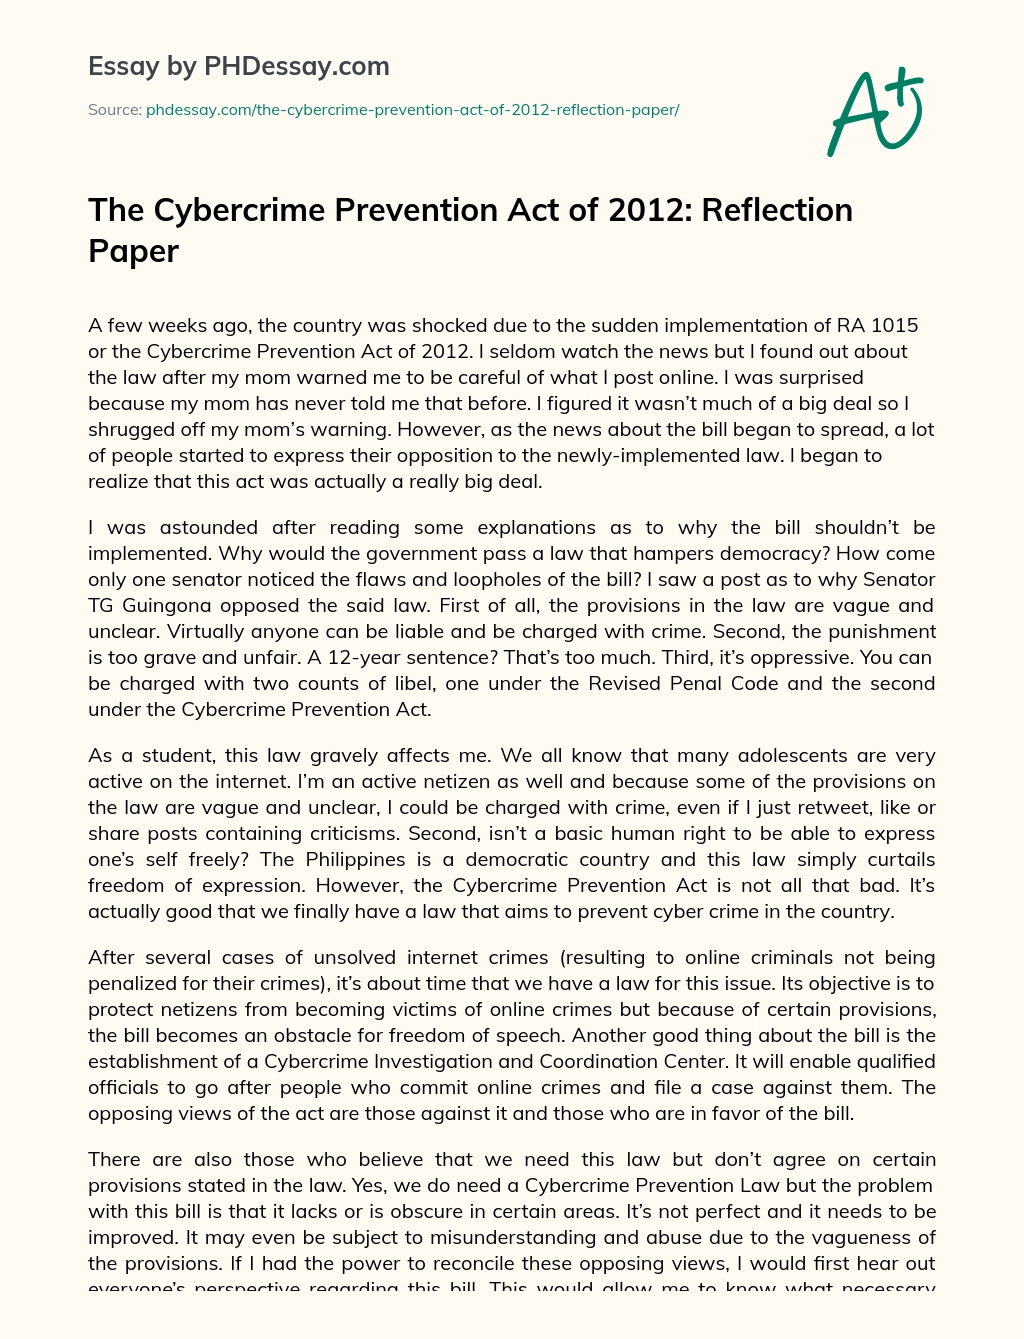 The Cybercrime Prevention Act of 2012: Reflection Paper essay